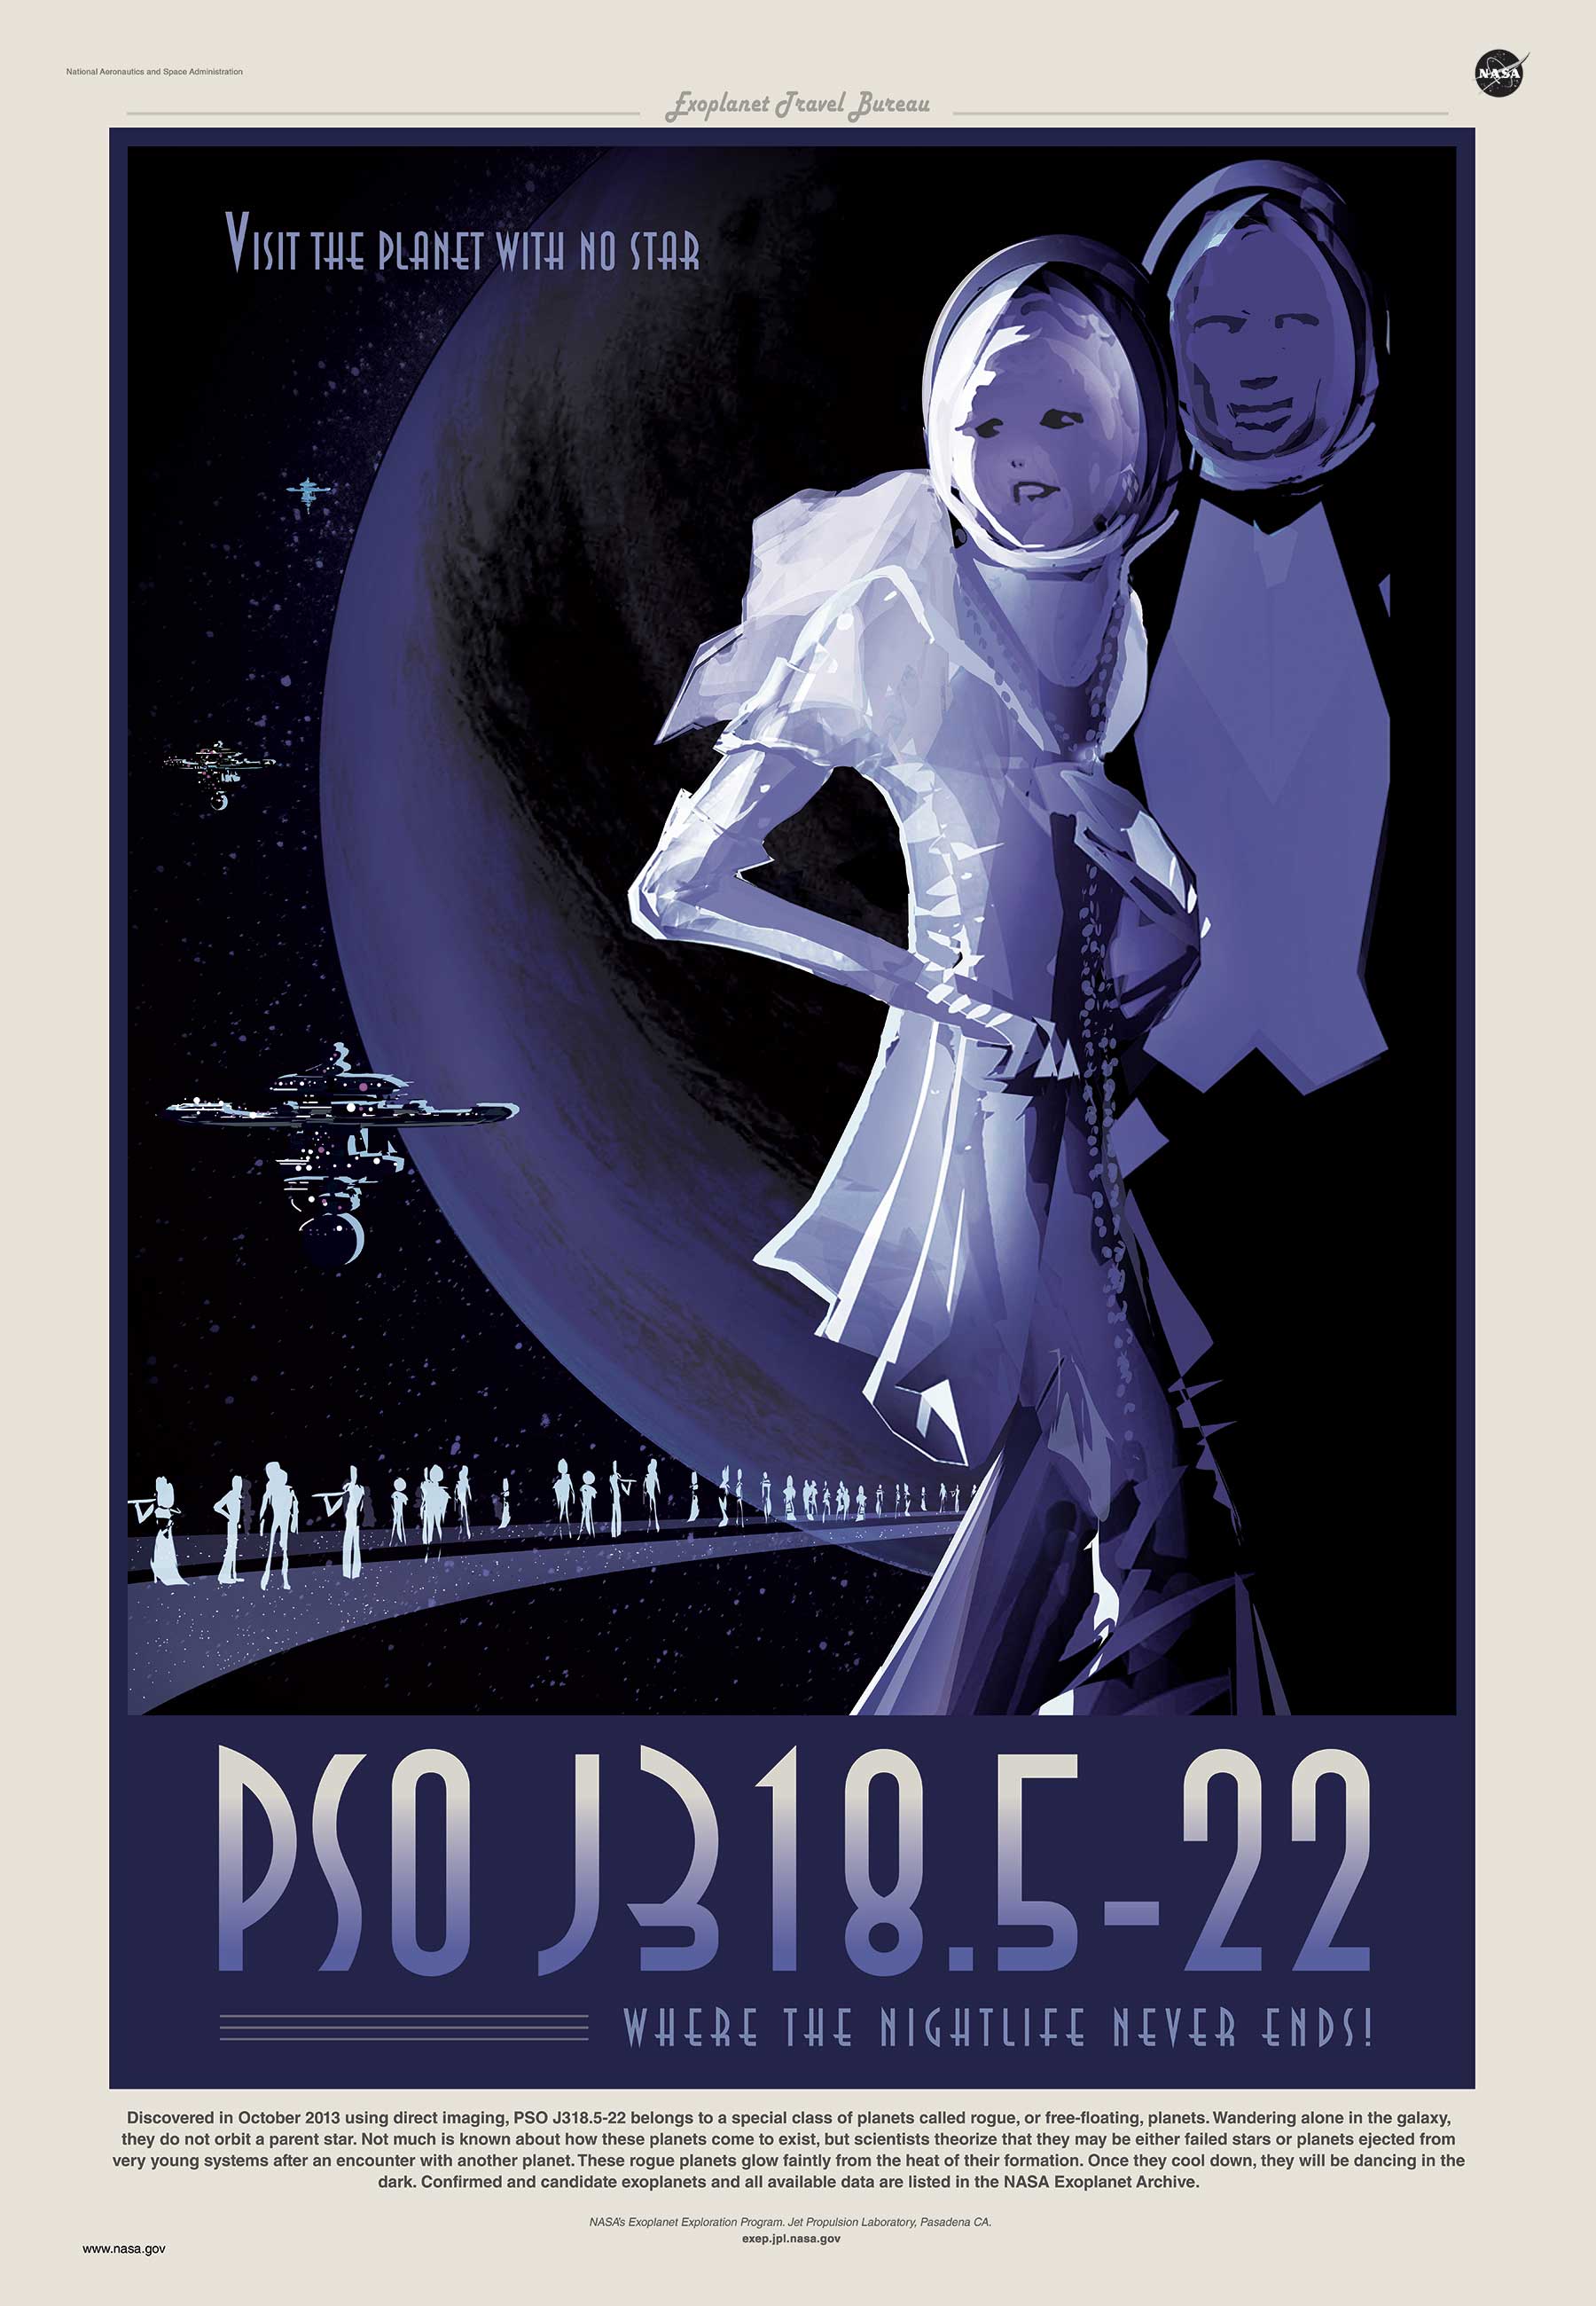 Travel poster showing darkly lit couples dancing on a space habitat near a rogue planet